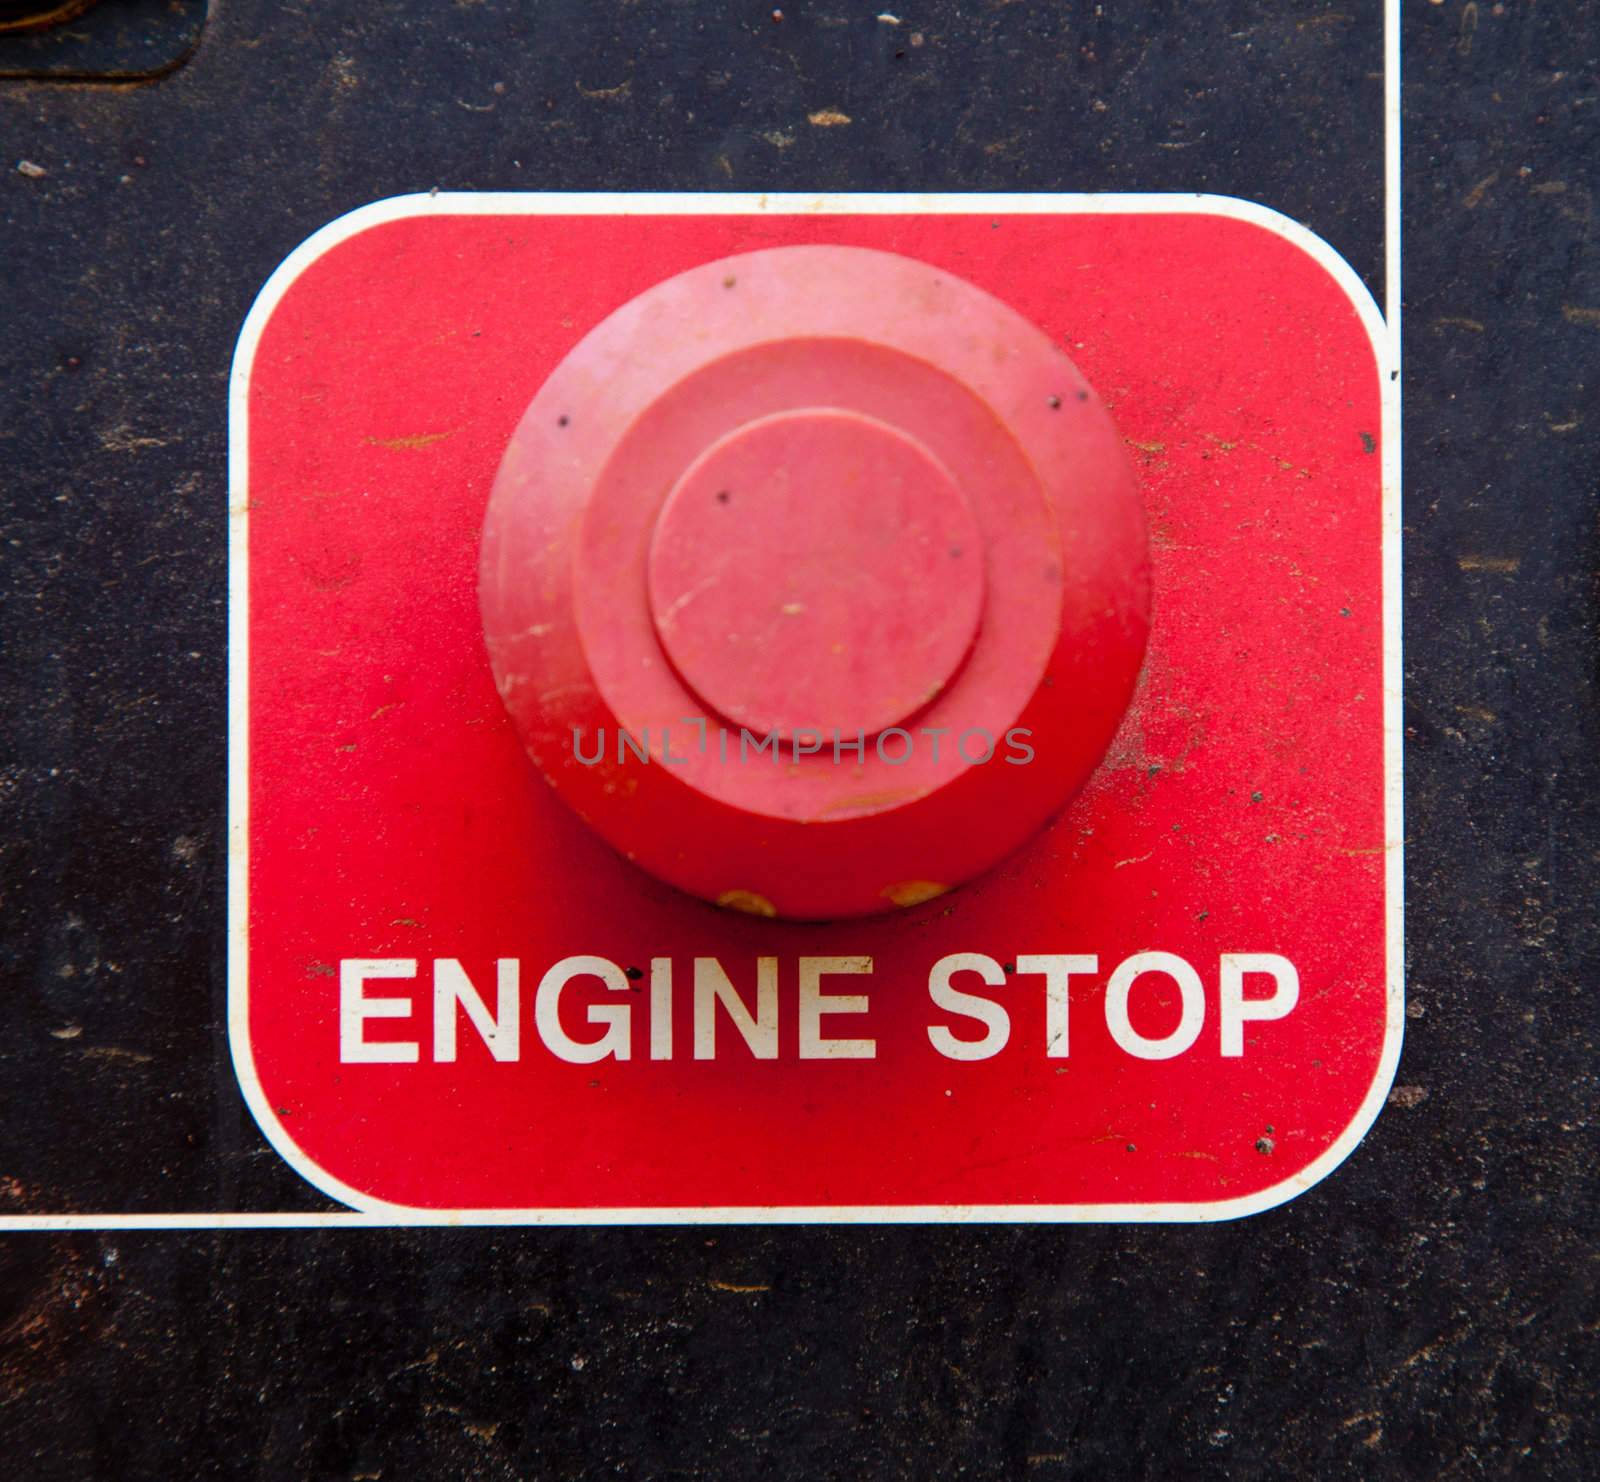 Engine Stop Button by steheap